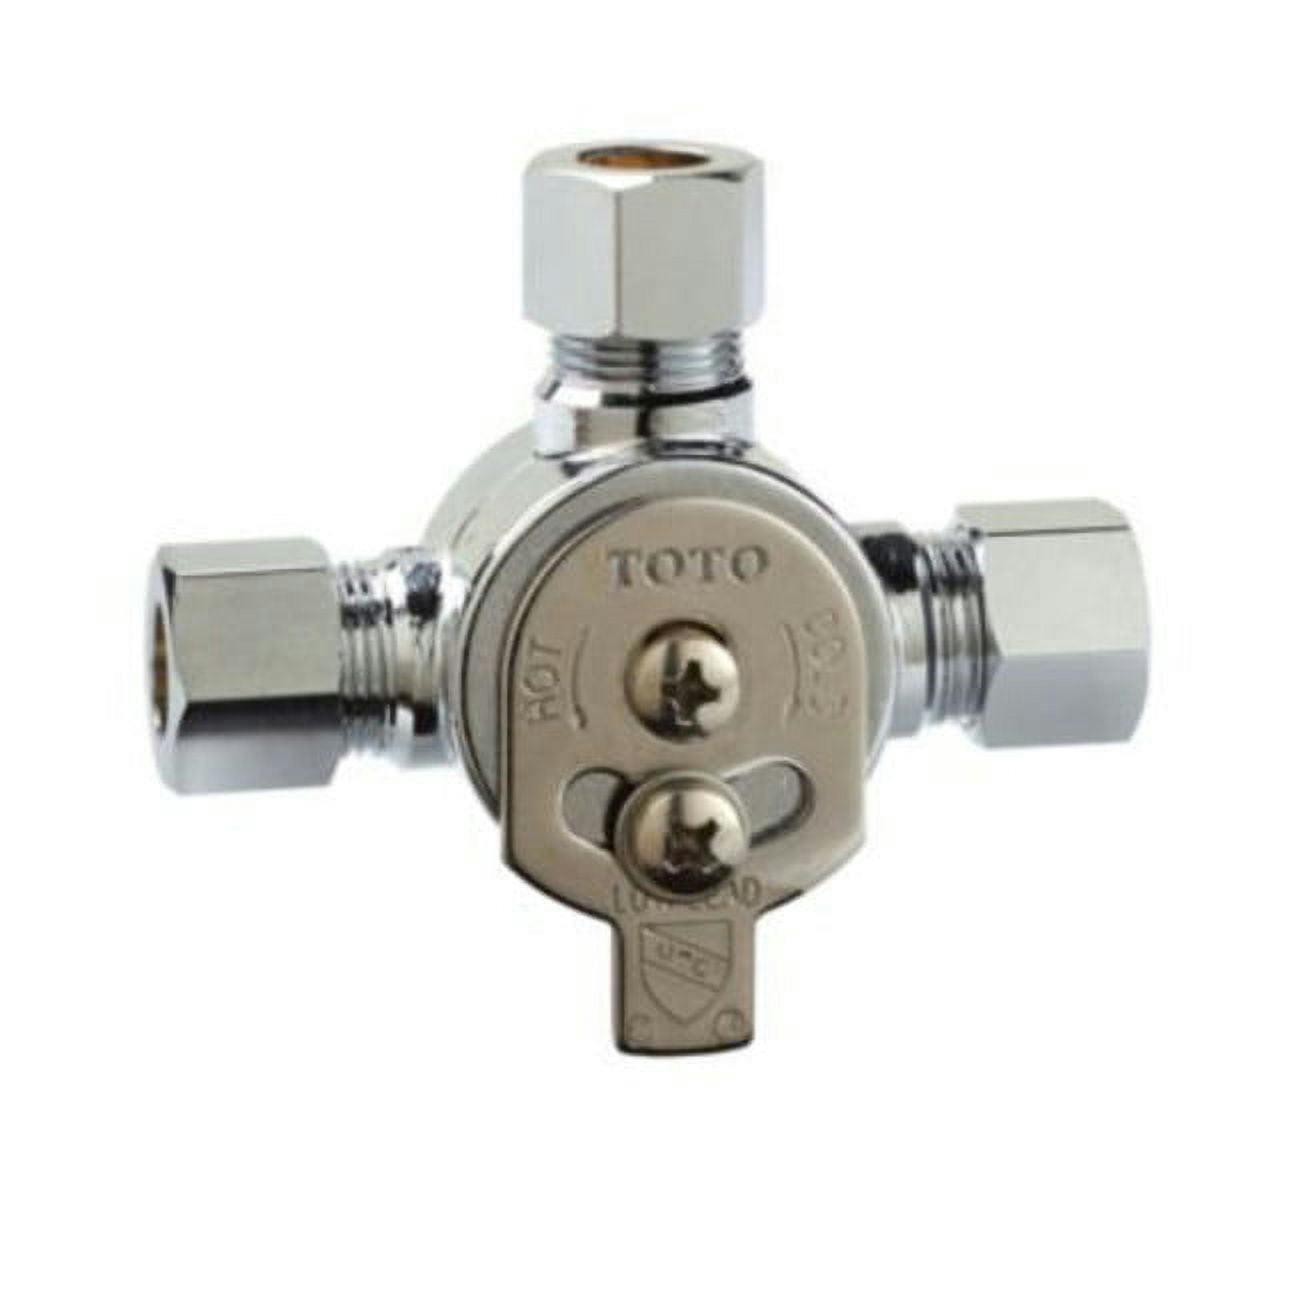 TOTO TLM10 EcoPower Solid Brass Modern Mixing Valve, Polished Chrome